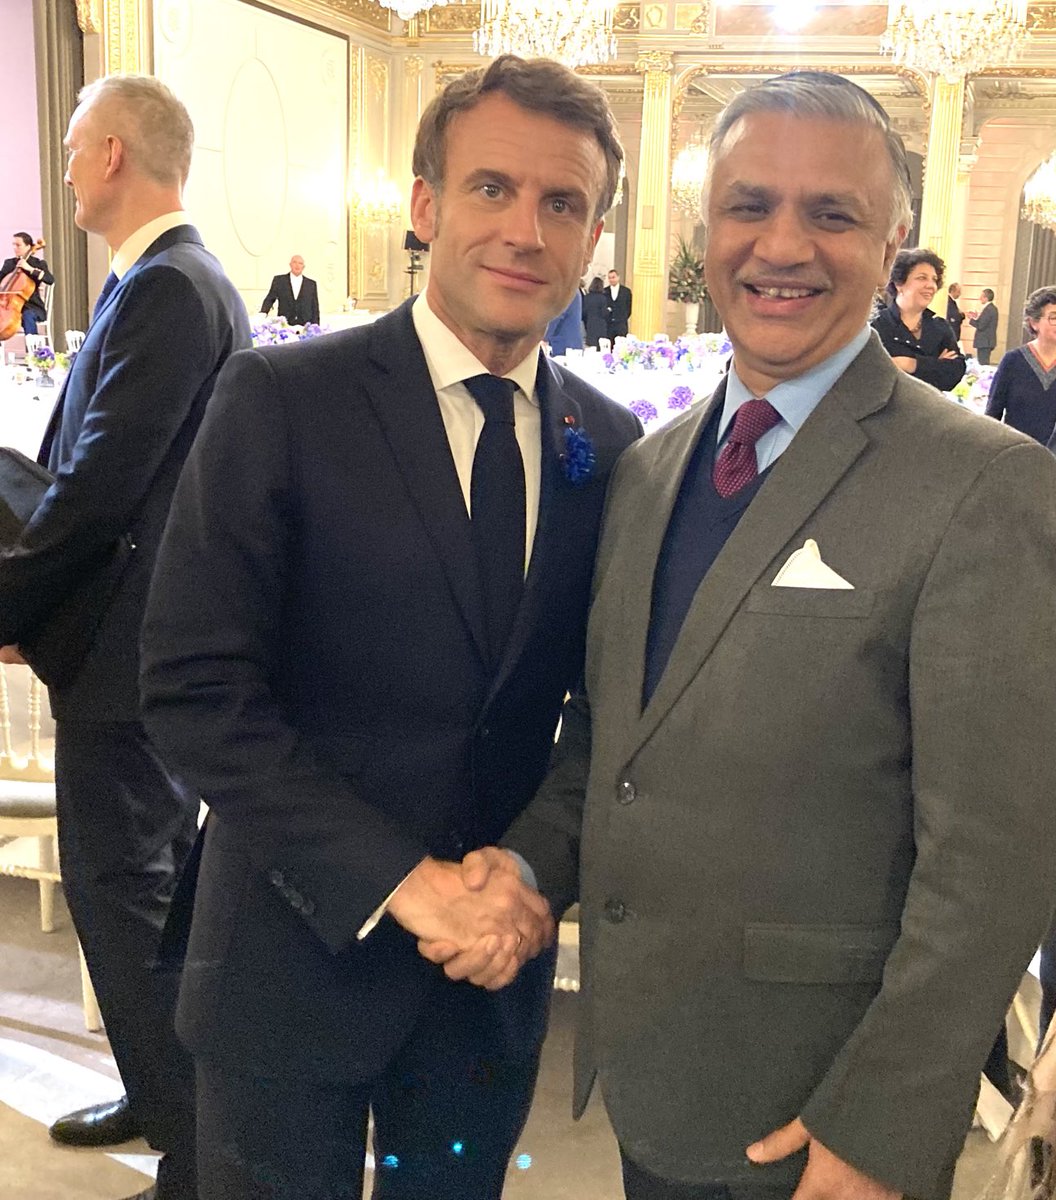 Thanks ⁦@EmmanuelMacron⁩ for being so generous with your time and for sharing your insights on how to make this world a better place ⁦@ParisPeaceForum⁩ ⁦@PascalLAMYPPF⁩ ⁦@JustinVaisse⁩ ⁦@RIS_NewDelhi⁩